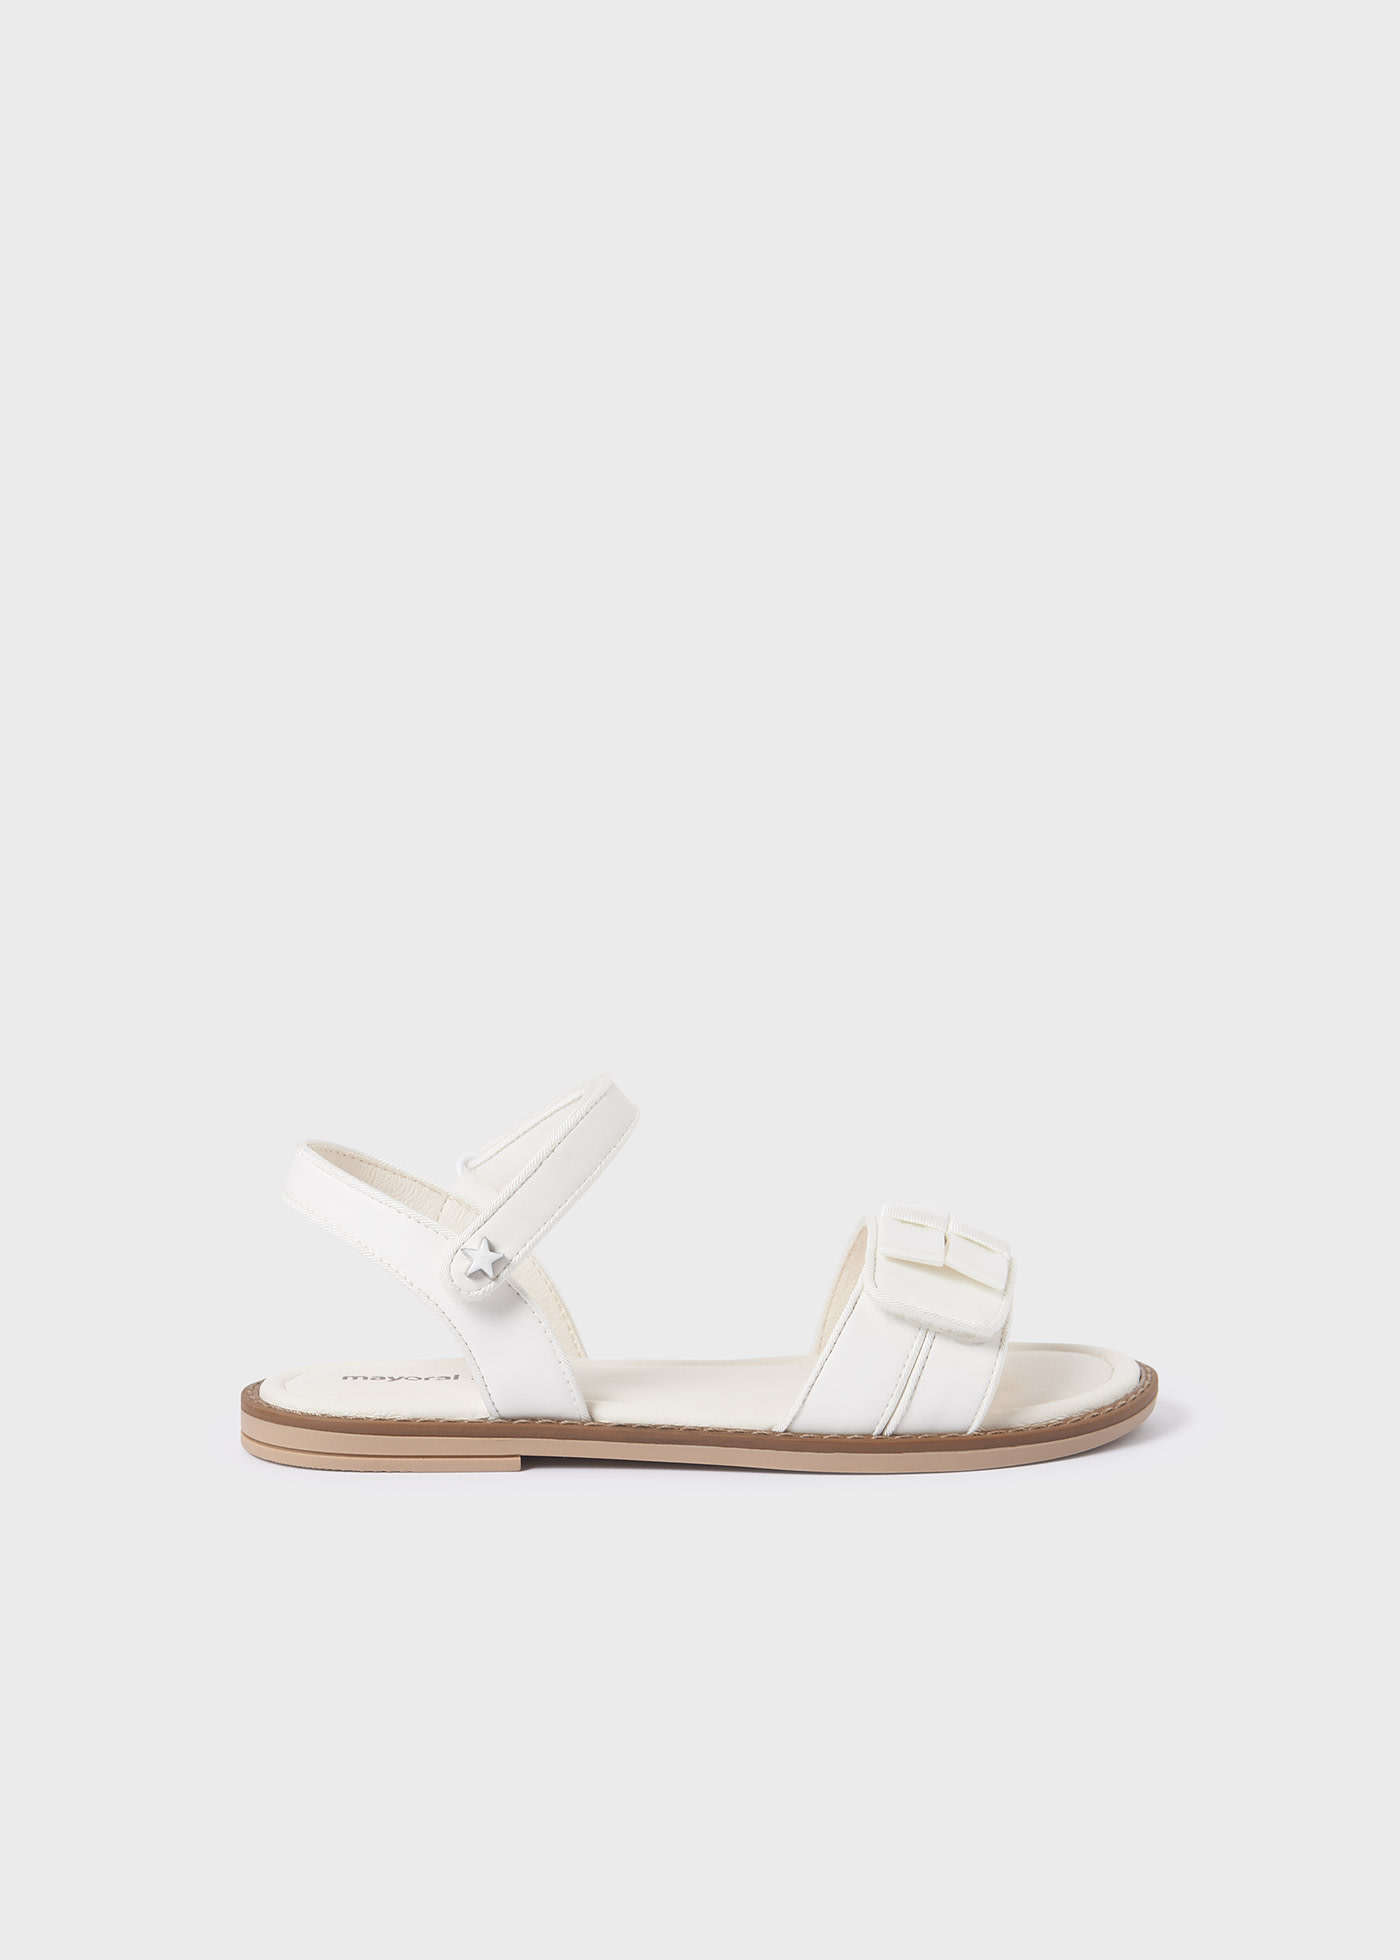 Sandals with double bow girl